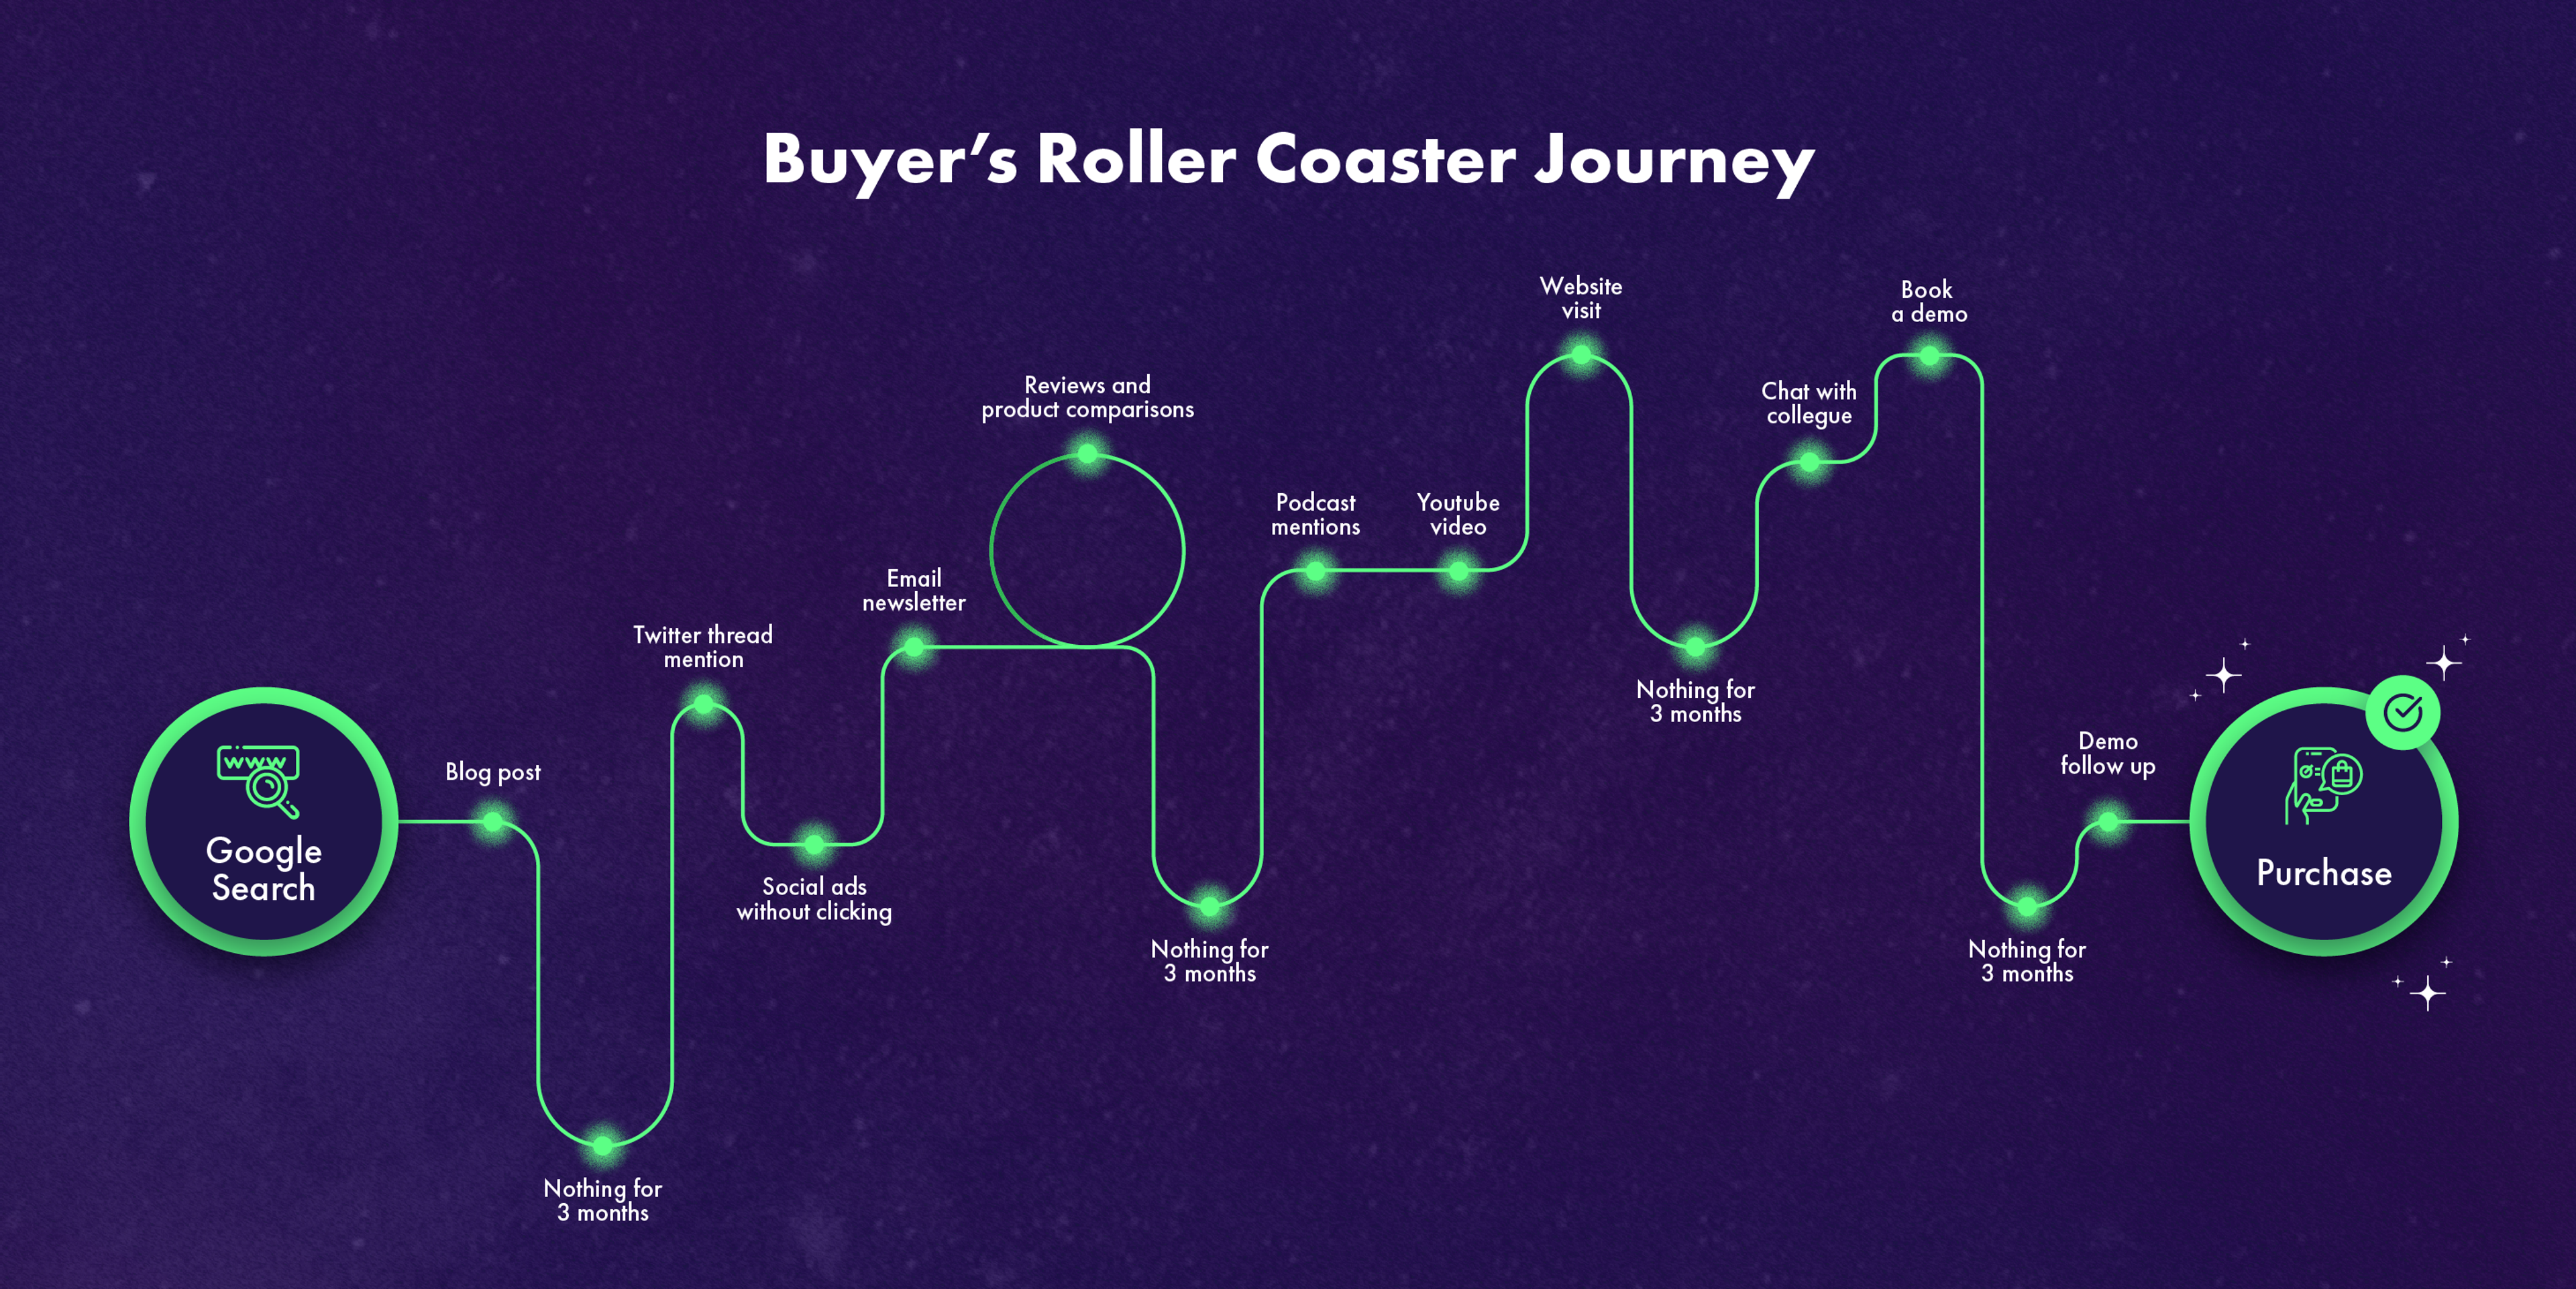 A buyer's journey that looks like a rollercoaster, moving up and down between content experiences.